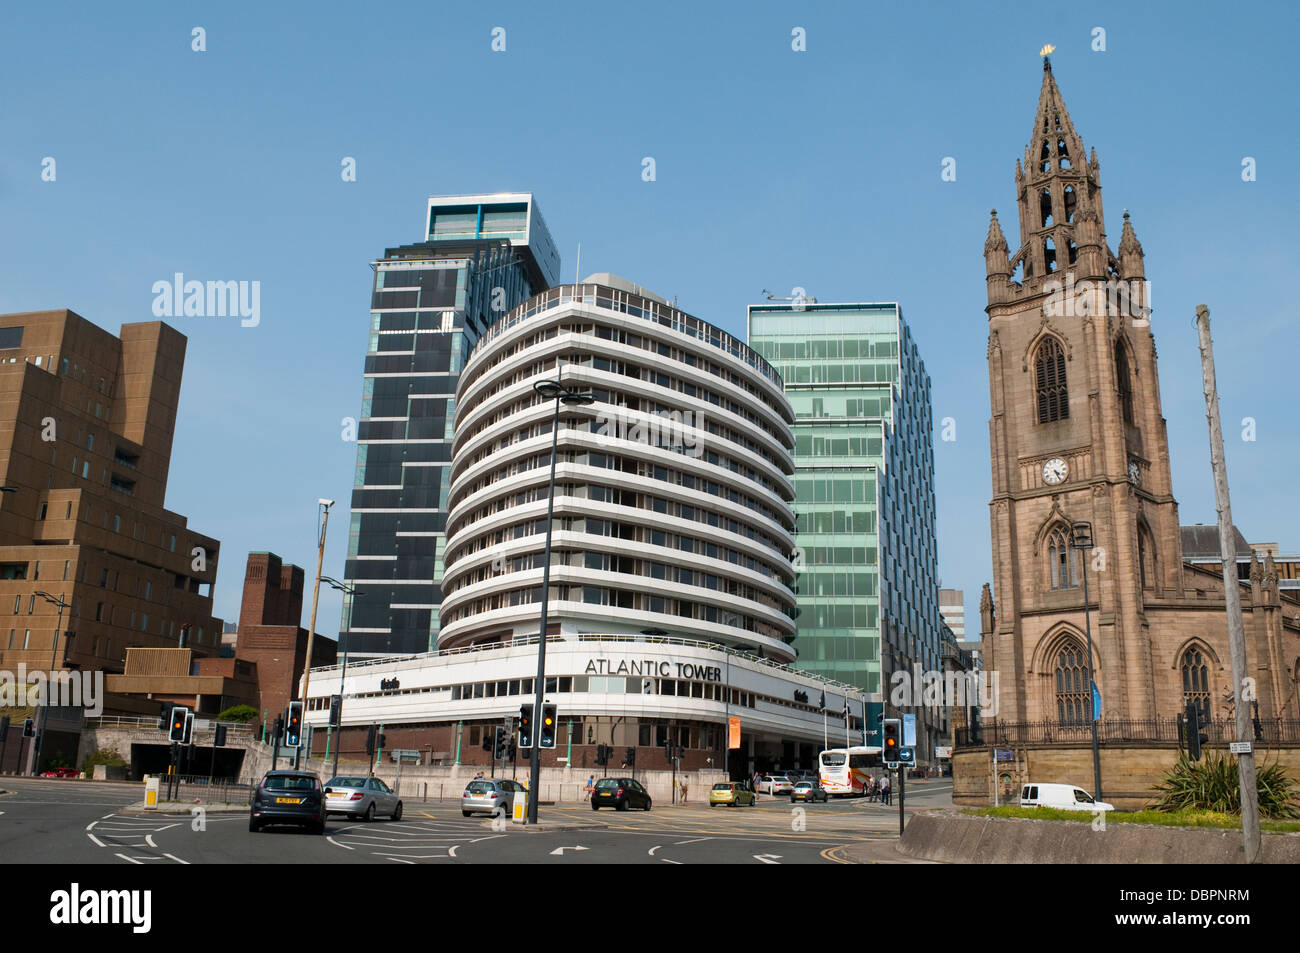 Atlantic Tower hotel by Thistle, Liverpool, UK Stock Photo